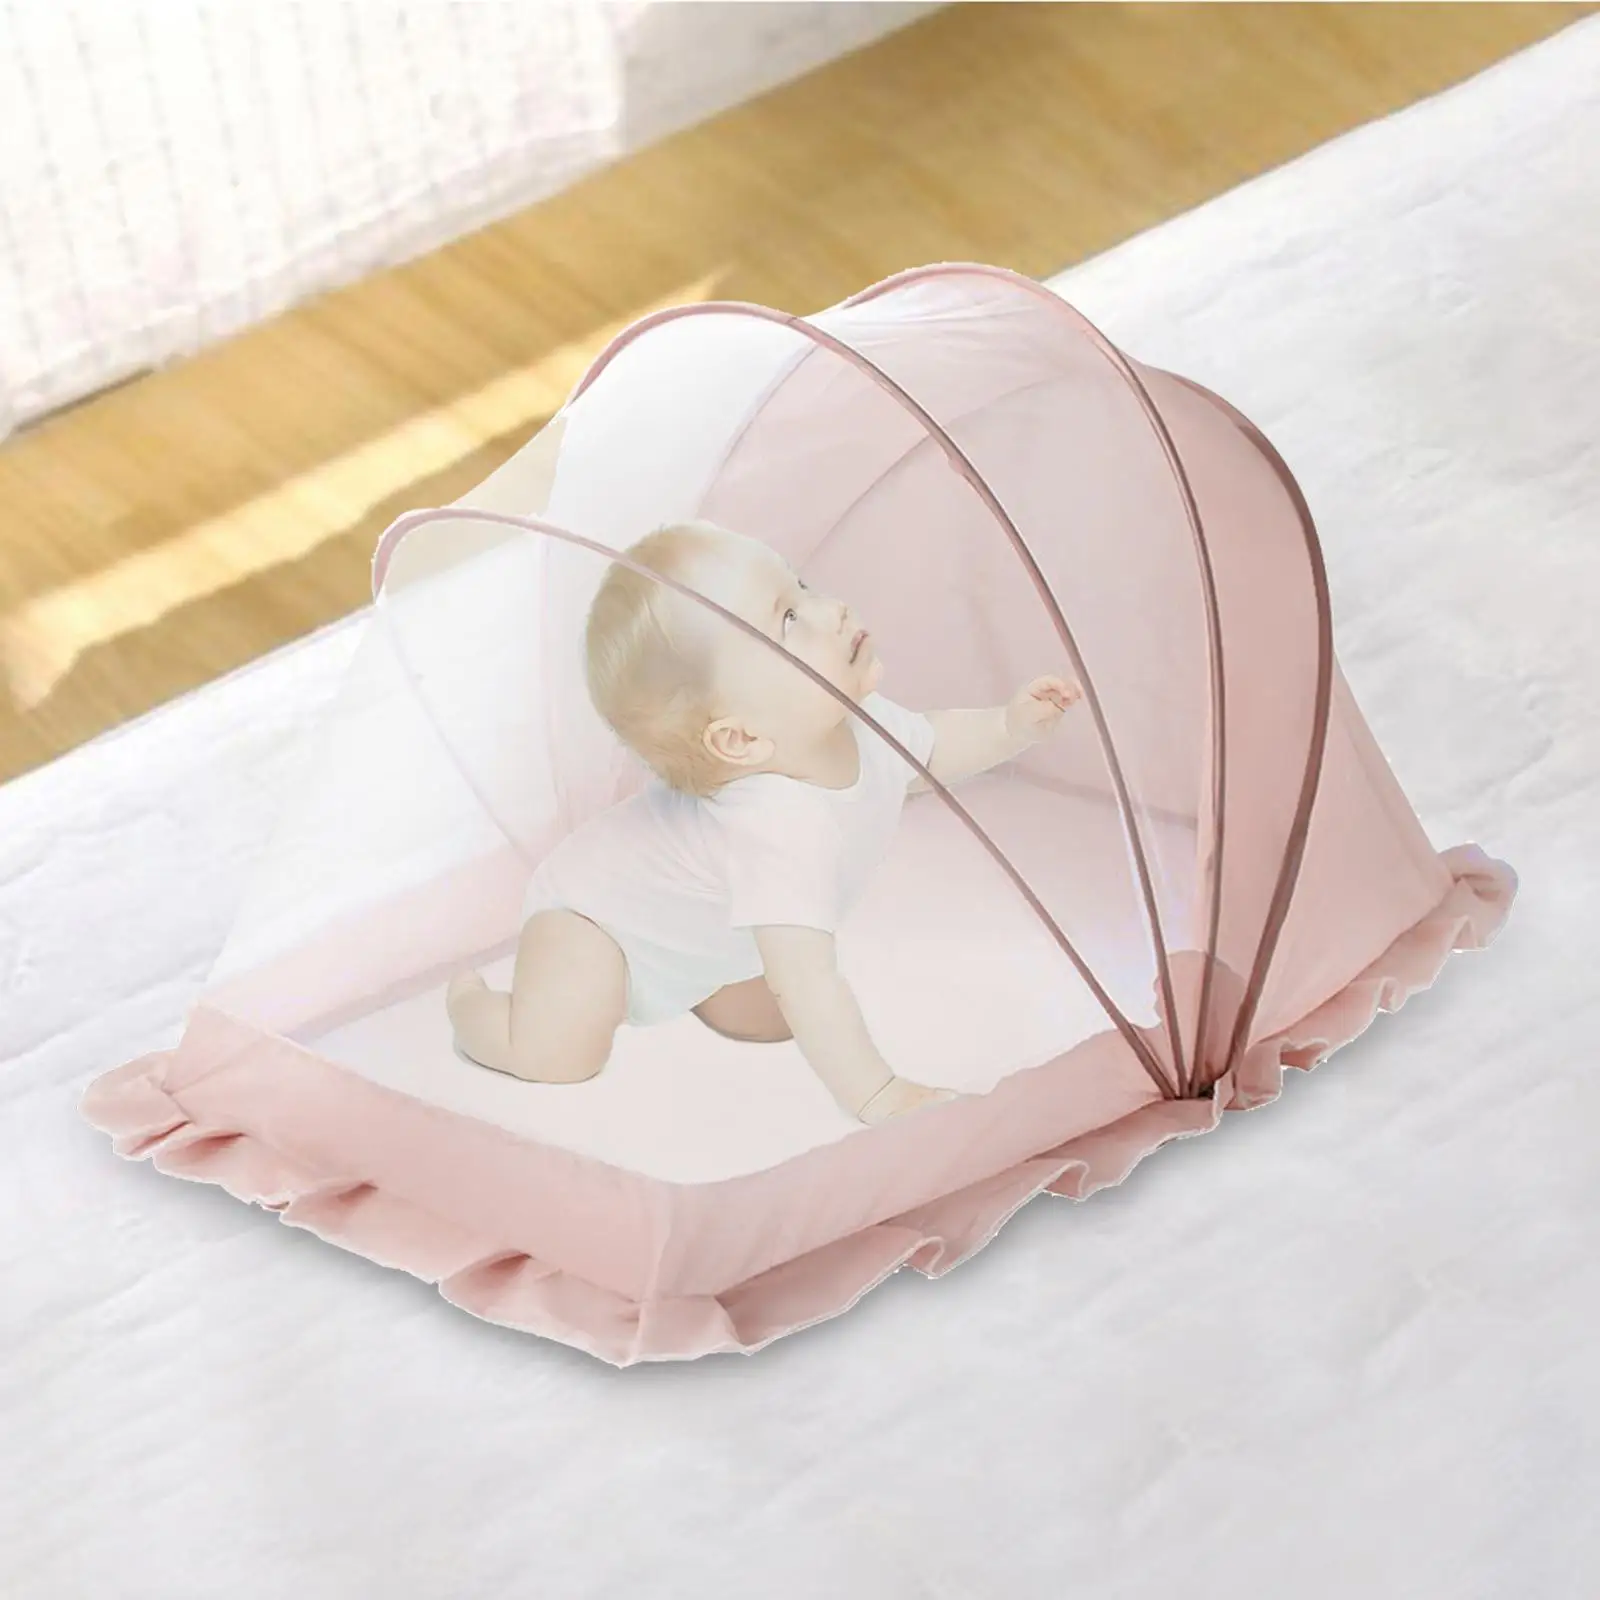 Crib Net Cover Multifunctional Portable Light Protection Cover for Newborn